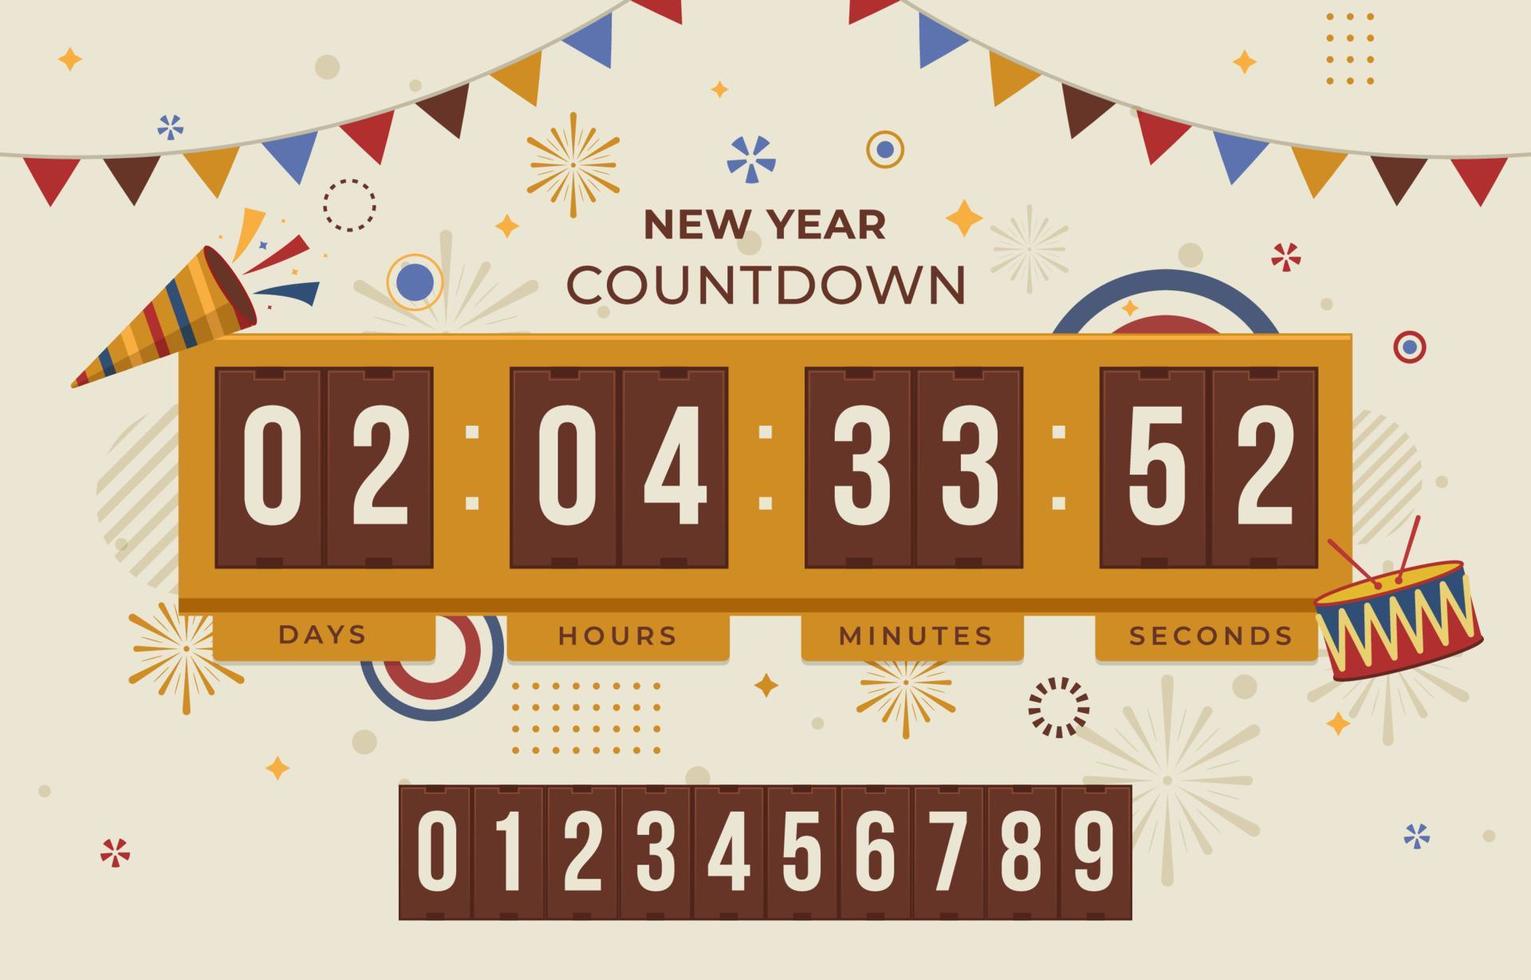 Count Down Clock Template vector